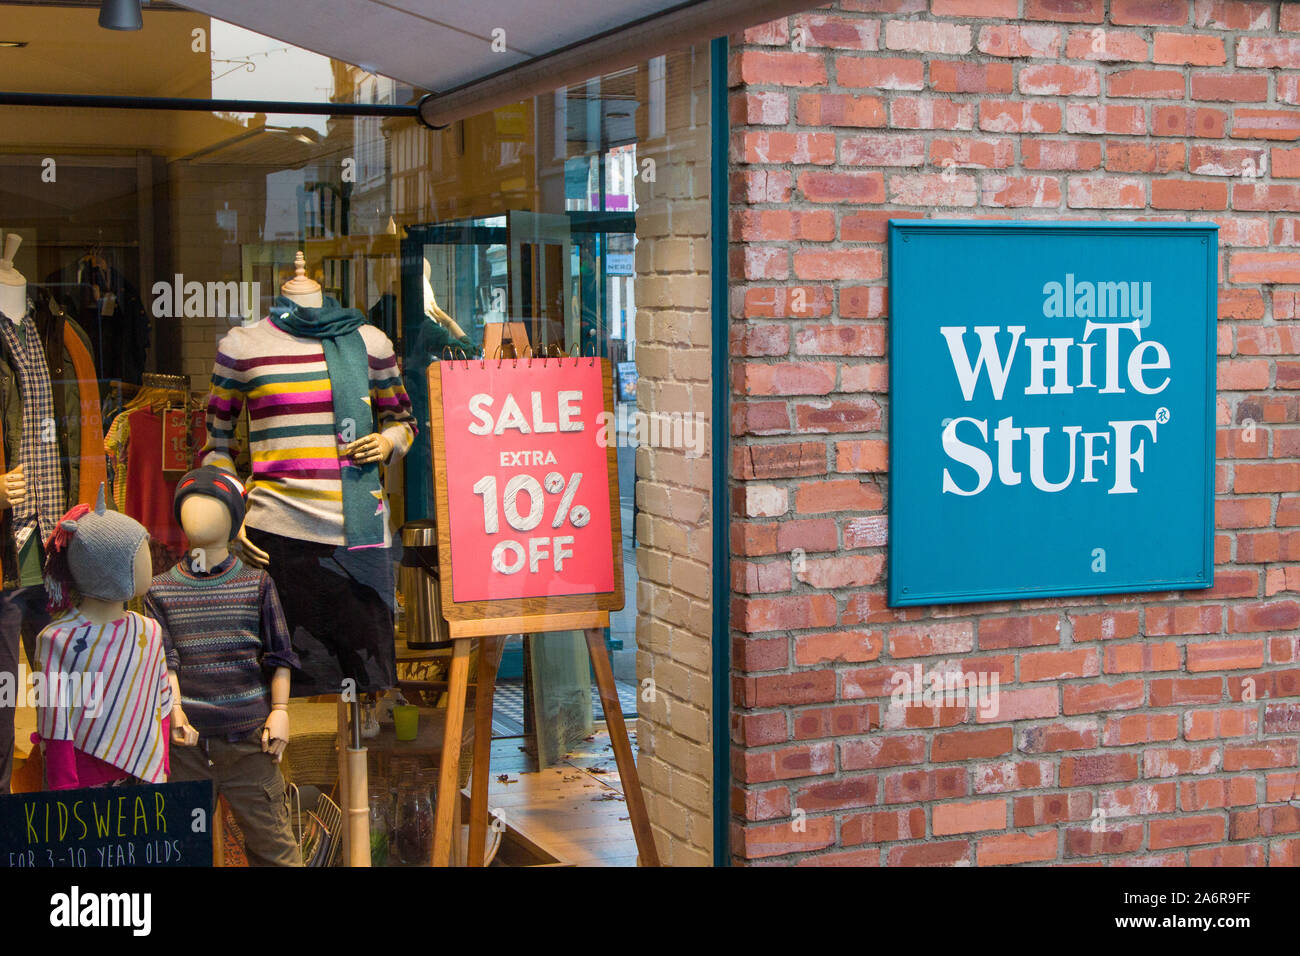 The shop window of the White Stuff clothing store in Henley-on-Thames with a sign for a sale 'Extra 10% Off' Stock Photo